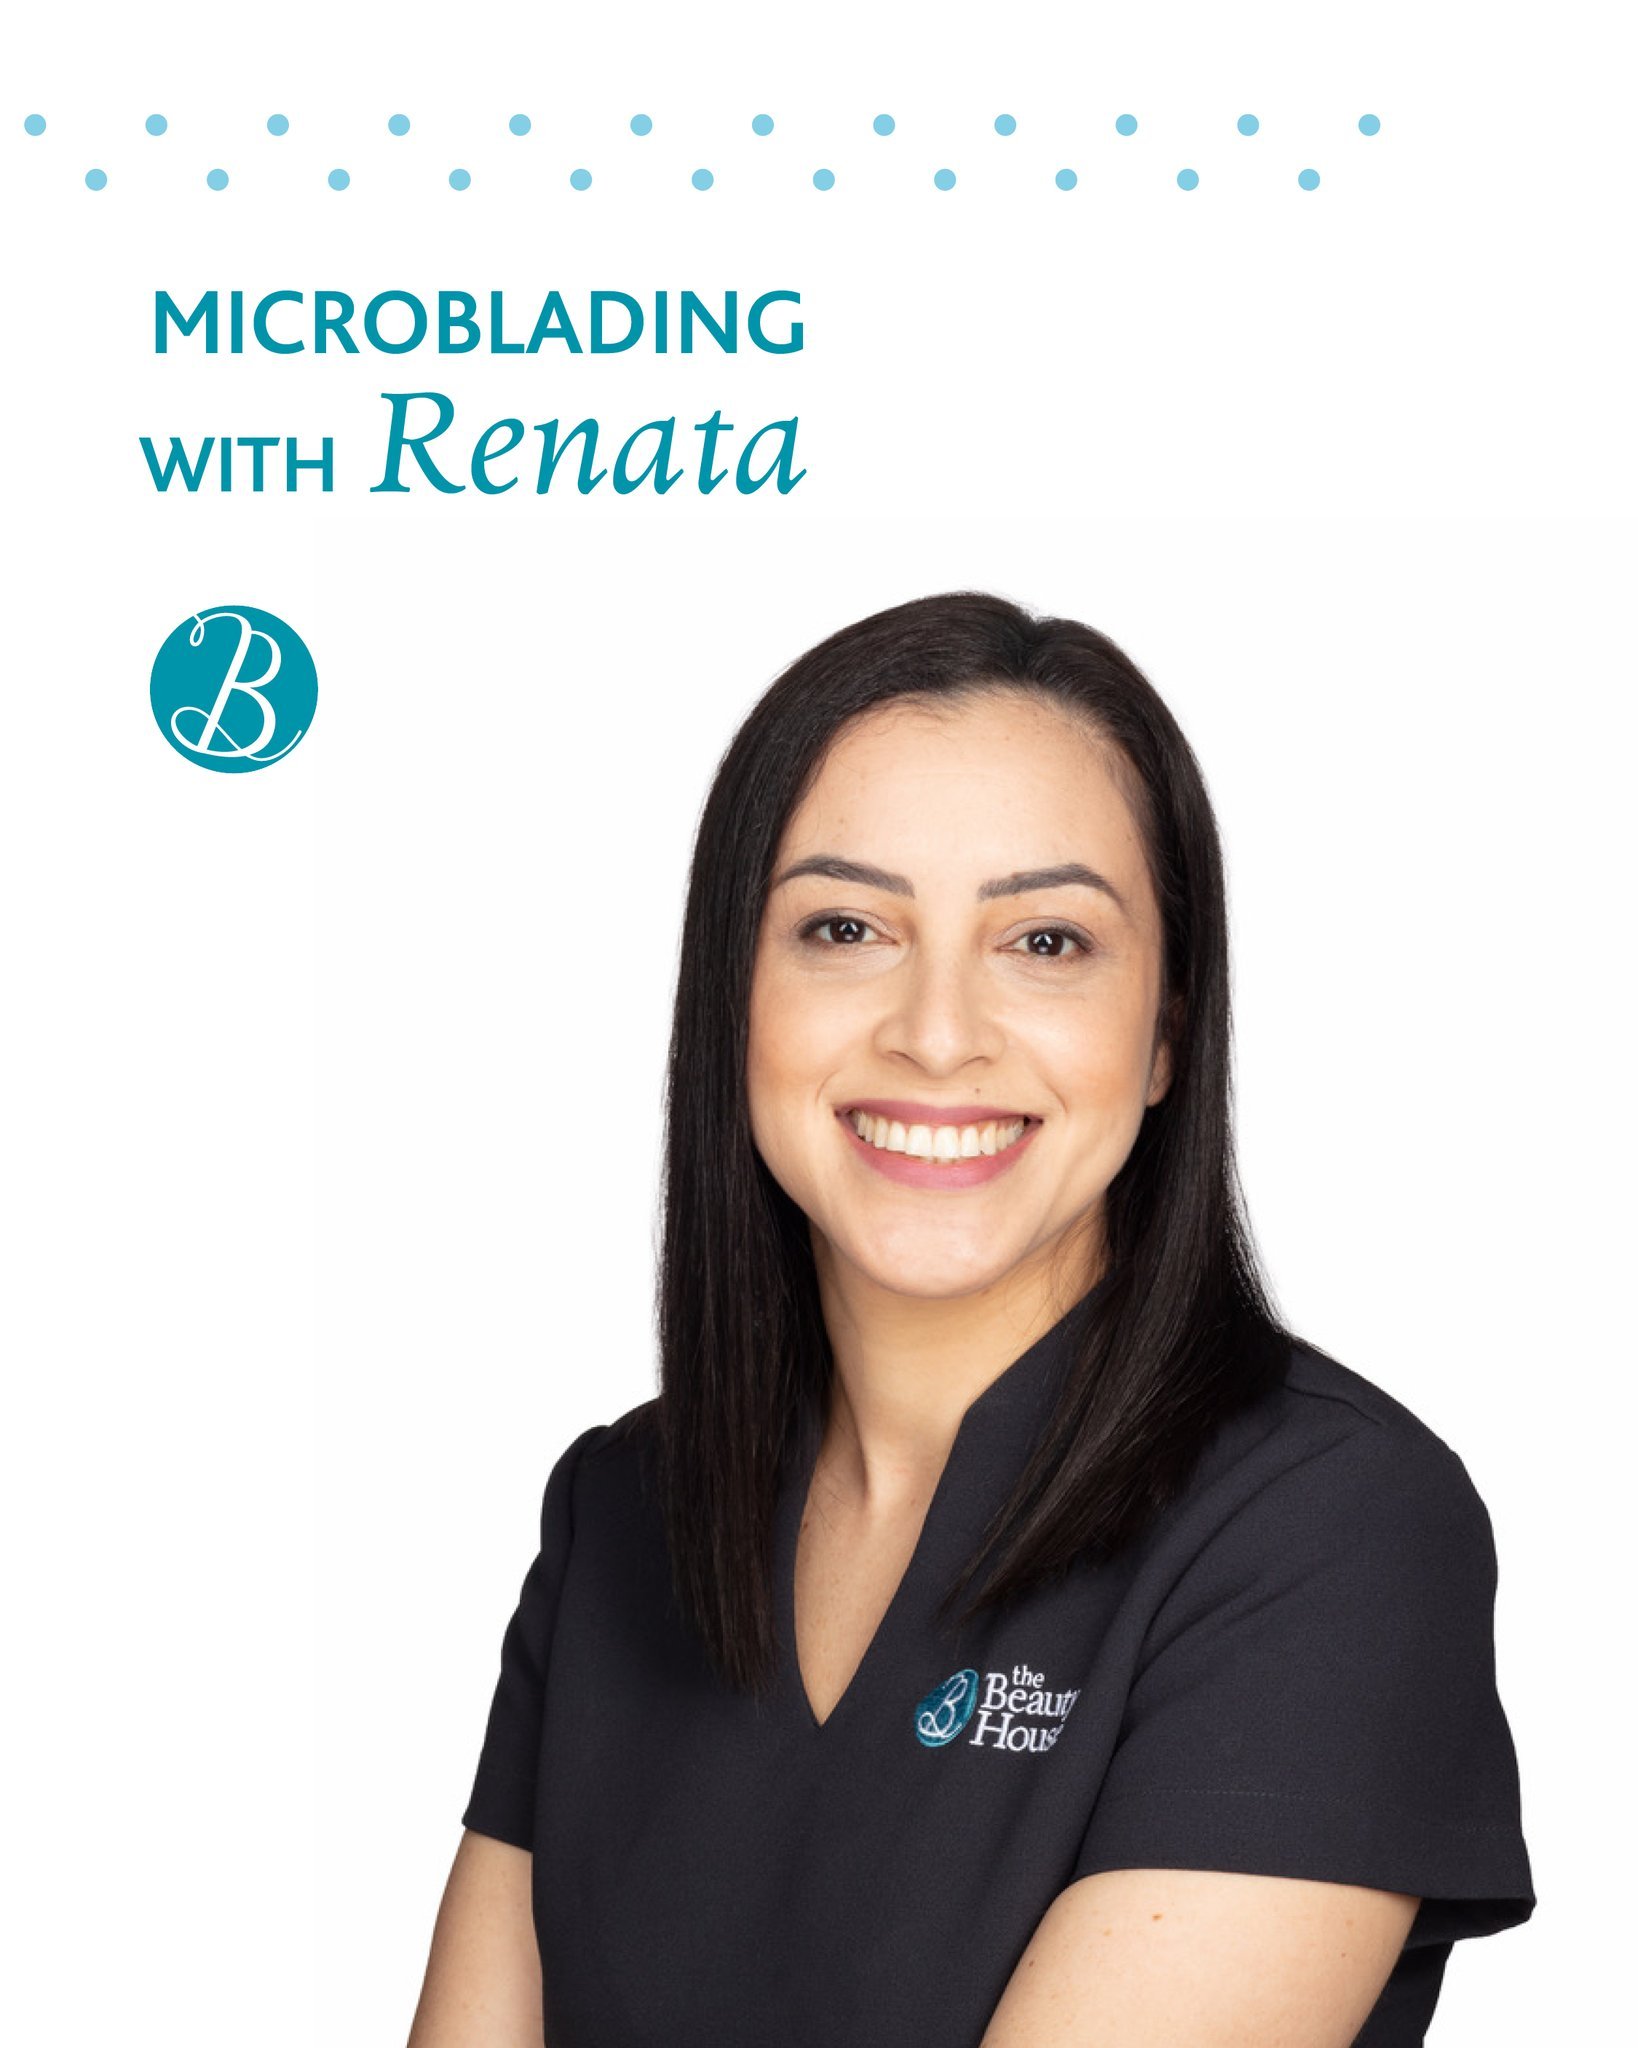 Microblading with Renata - OFFER EXTENDED UNTIL THE END OF APRIL

Due to high demand, we have decided to continue our March promotion until the end of April. We are offering FREE Semi-Permanent Make-Up consultations so you can come and chat to us and